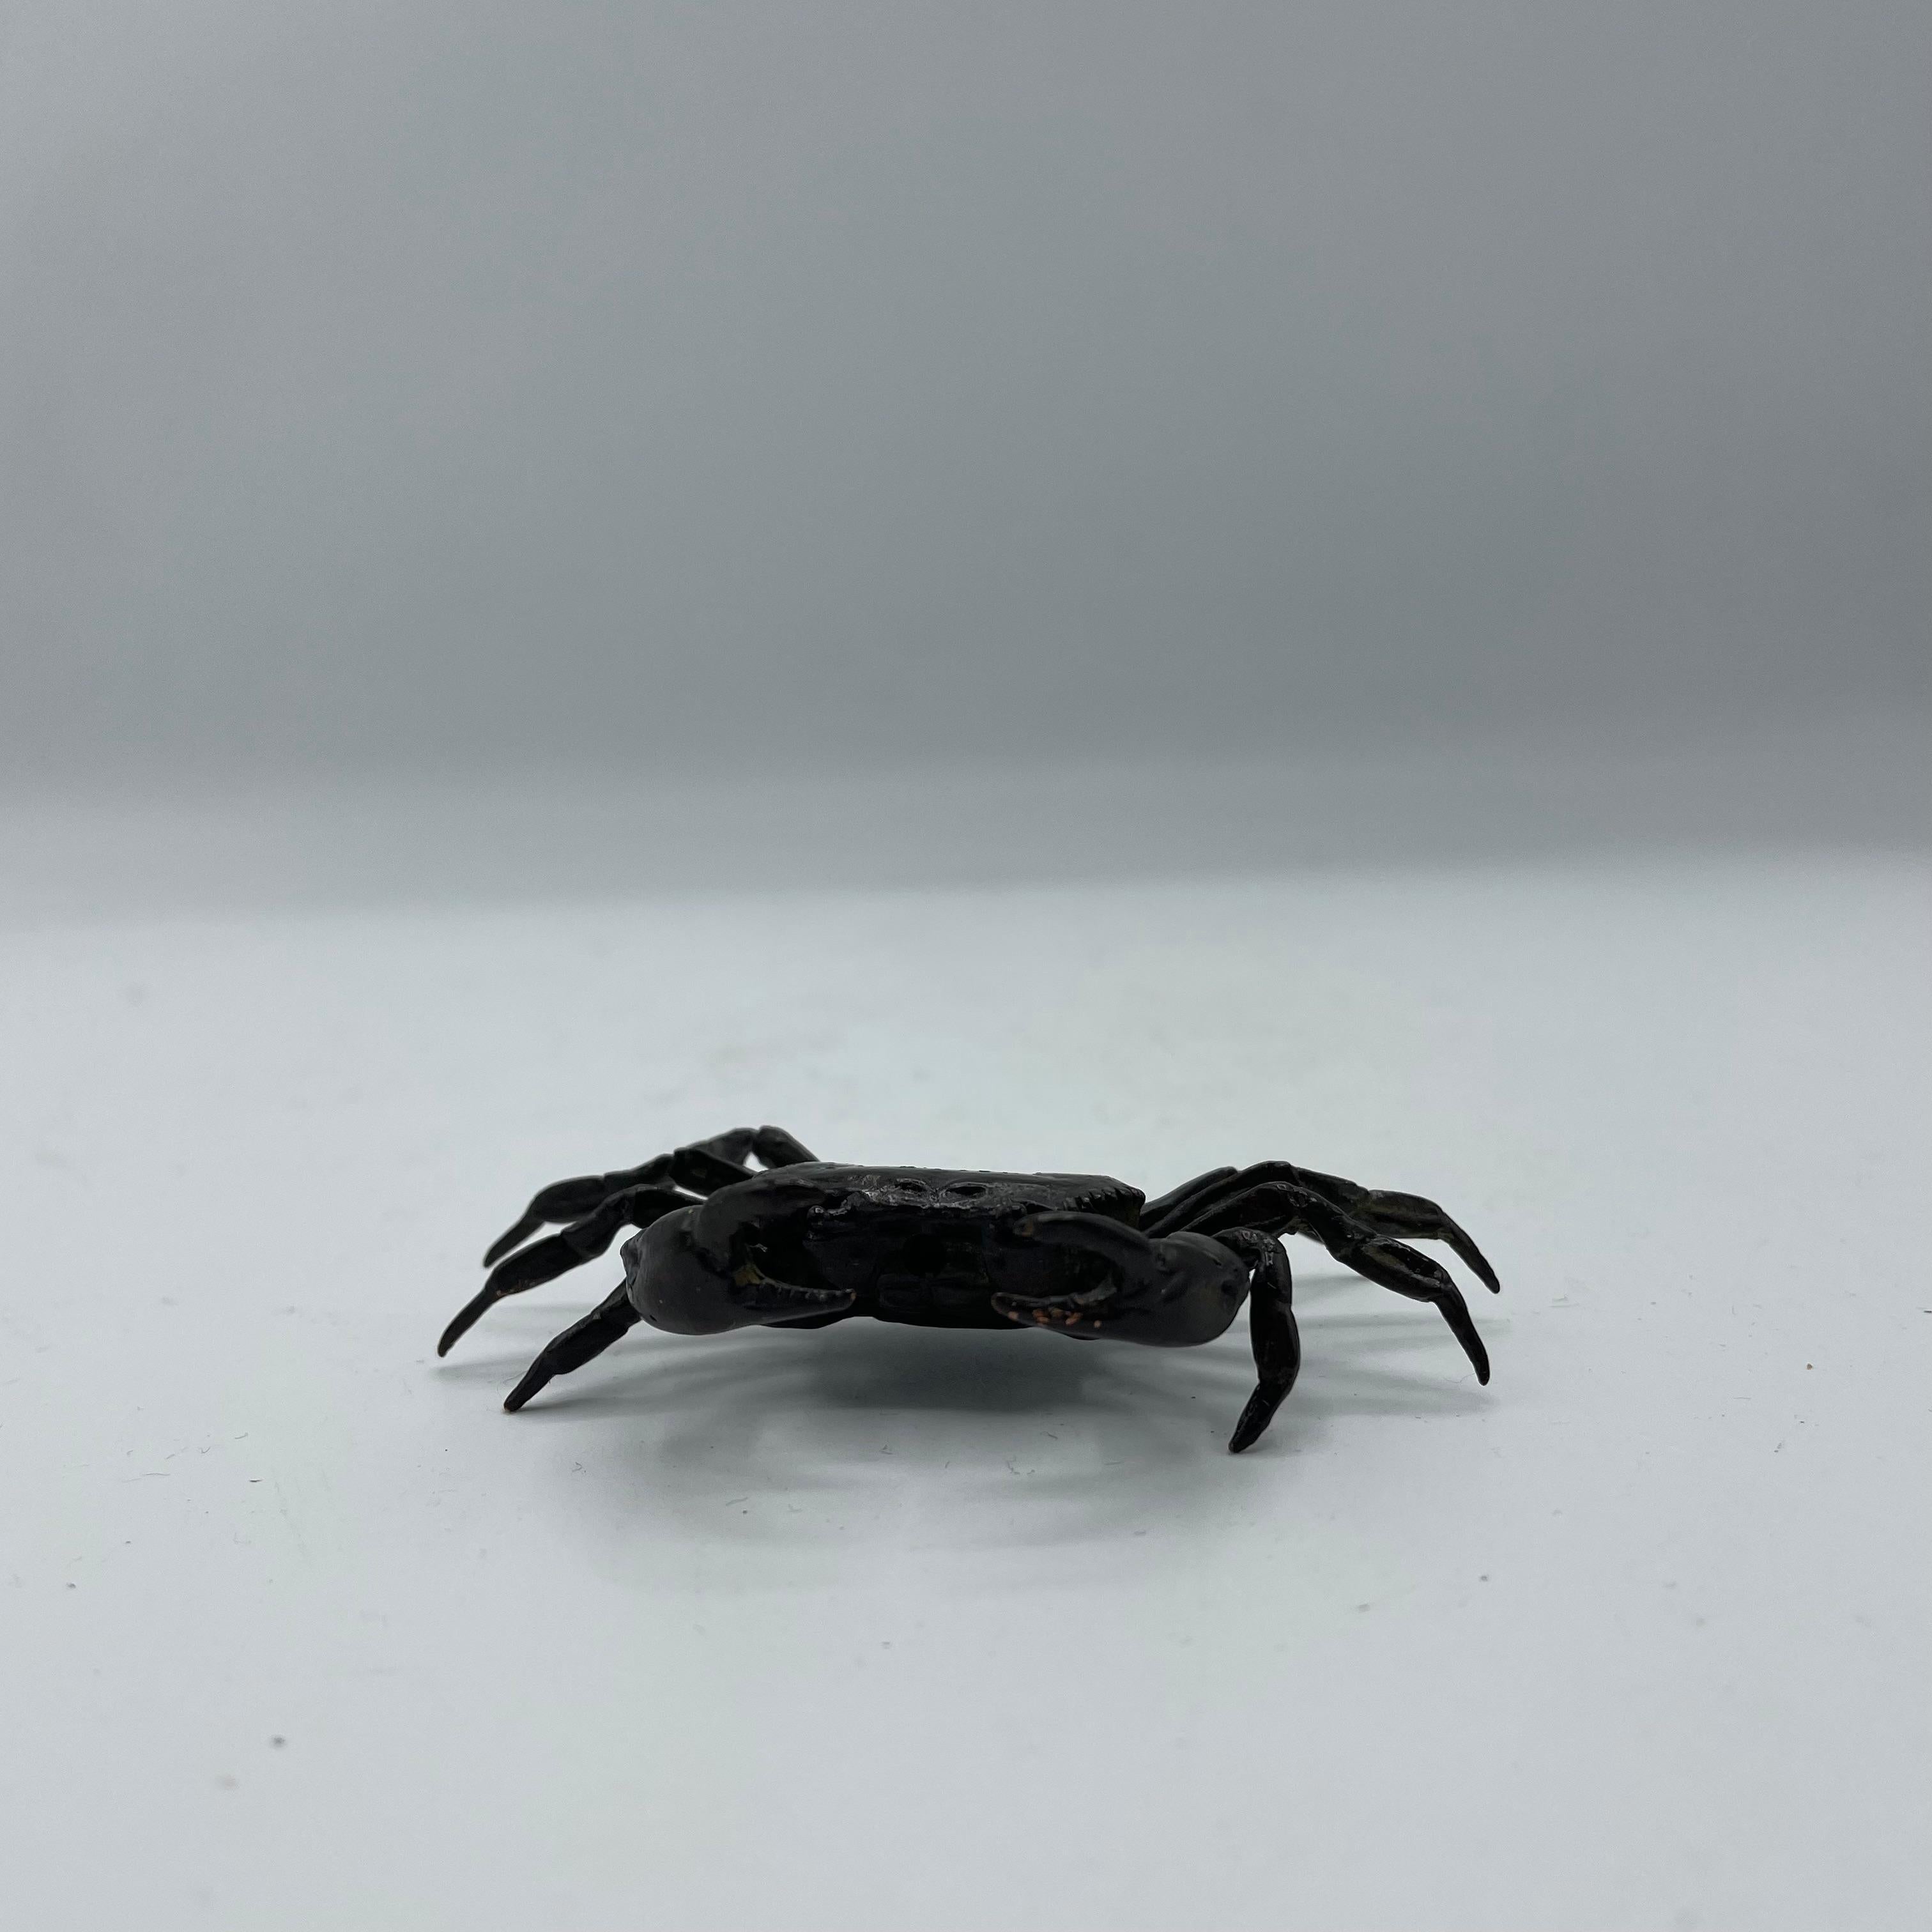 Object of crab with bronze:
A very precious object made before the second world war, when bronze was rare to find.

-Details-
Era: Showa (around 1930-1939)
Materials: Bronze
Signature: An-no-suke 
Place: Kyoto prefecture
Company: Ryubudno